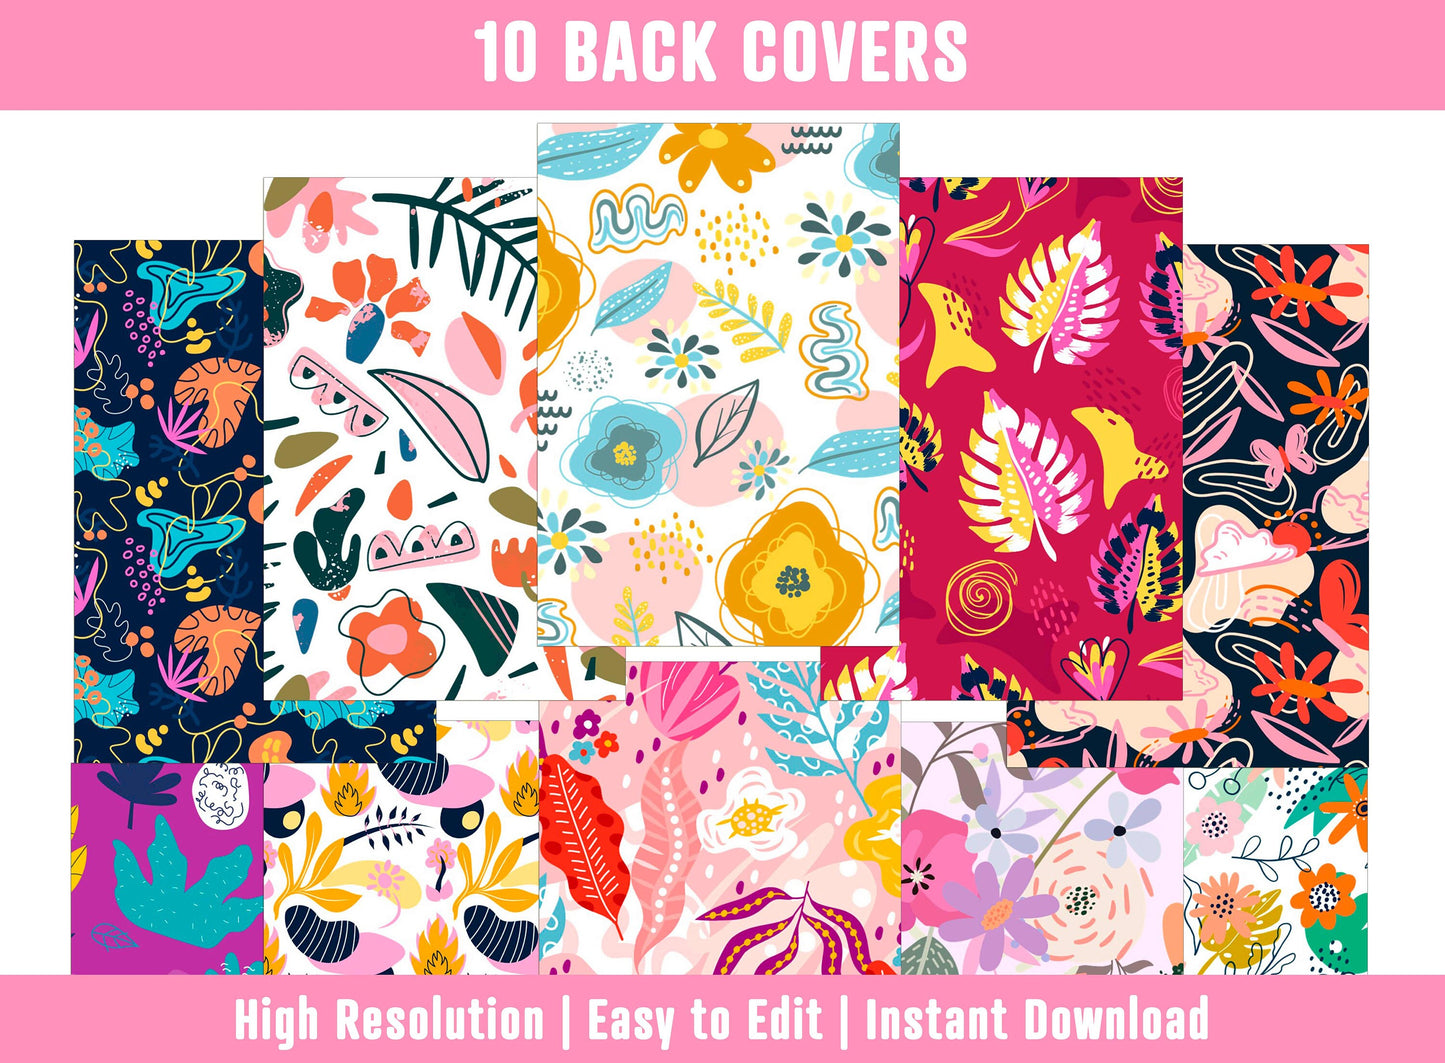 PowerPoint Binder Covers, 10 Printable/Editable Abstract Floral Covers & Spines, Binder/Planner Inserts for Teacher, Student, Home School